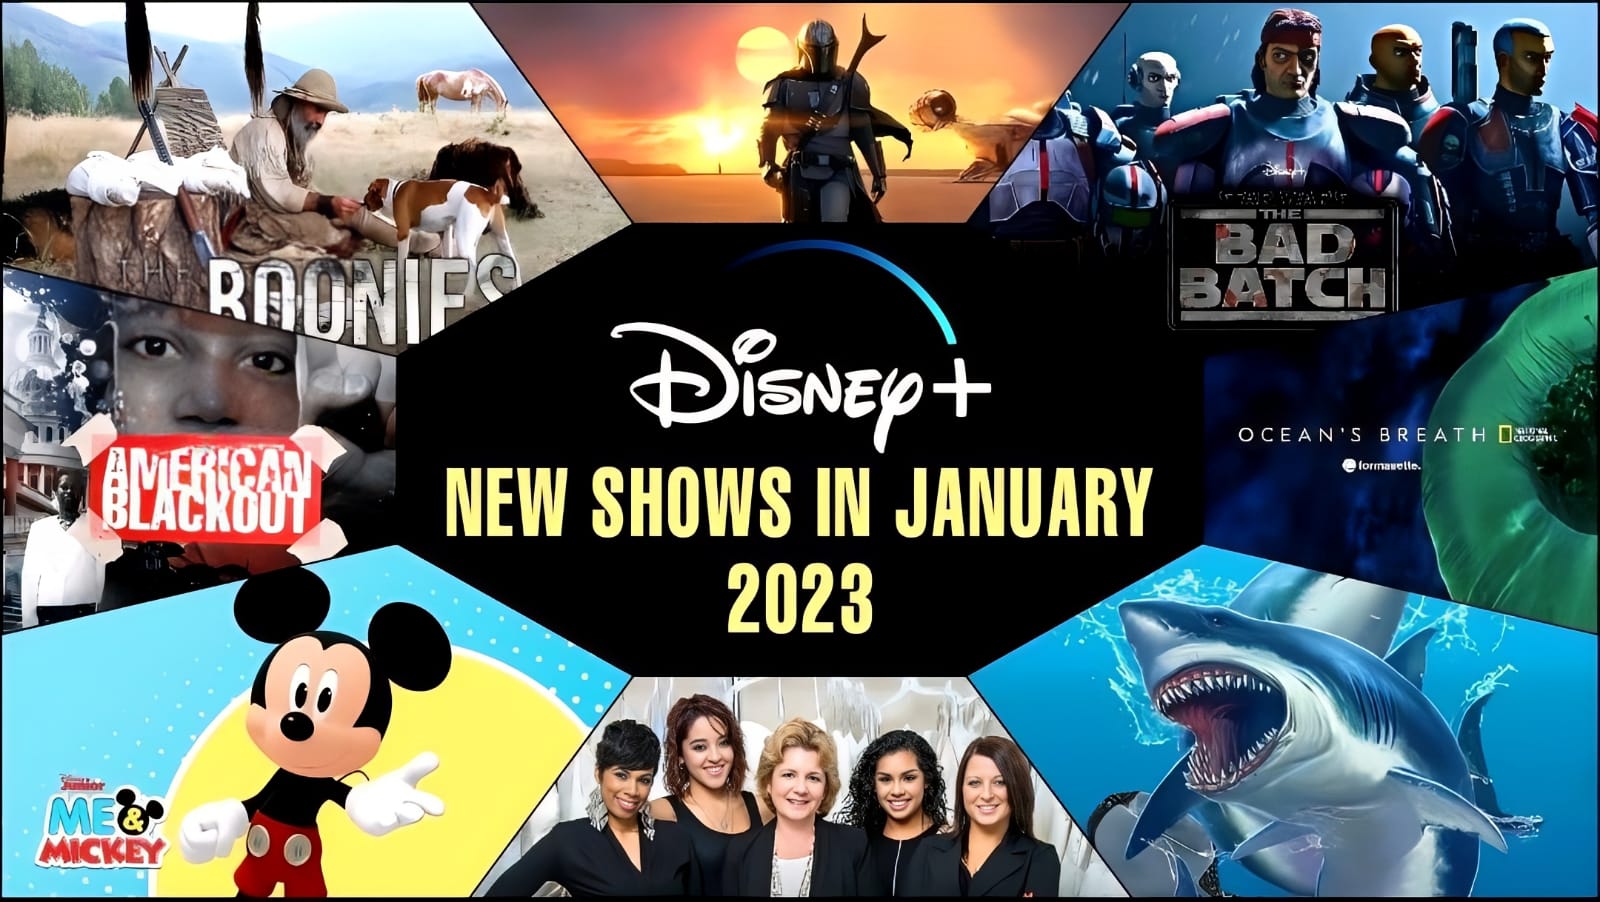 Disney+ New Shows in January 2023